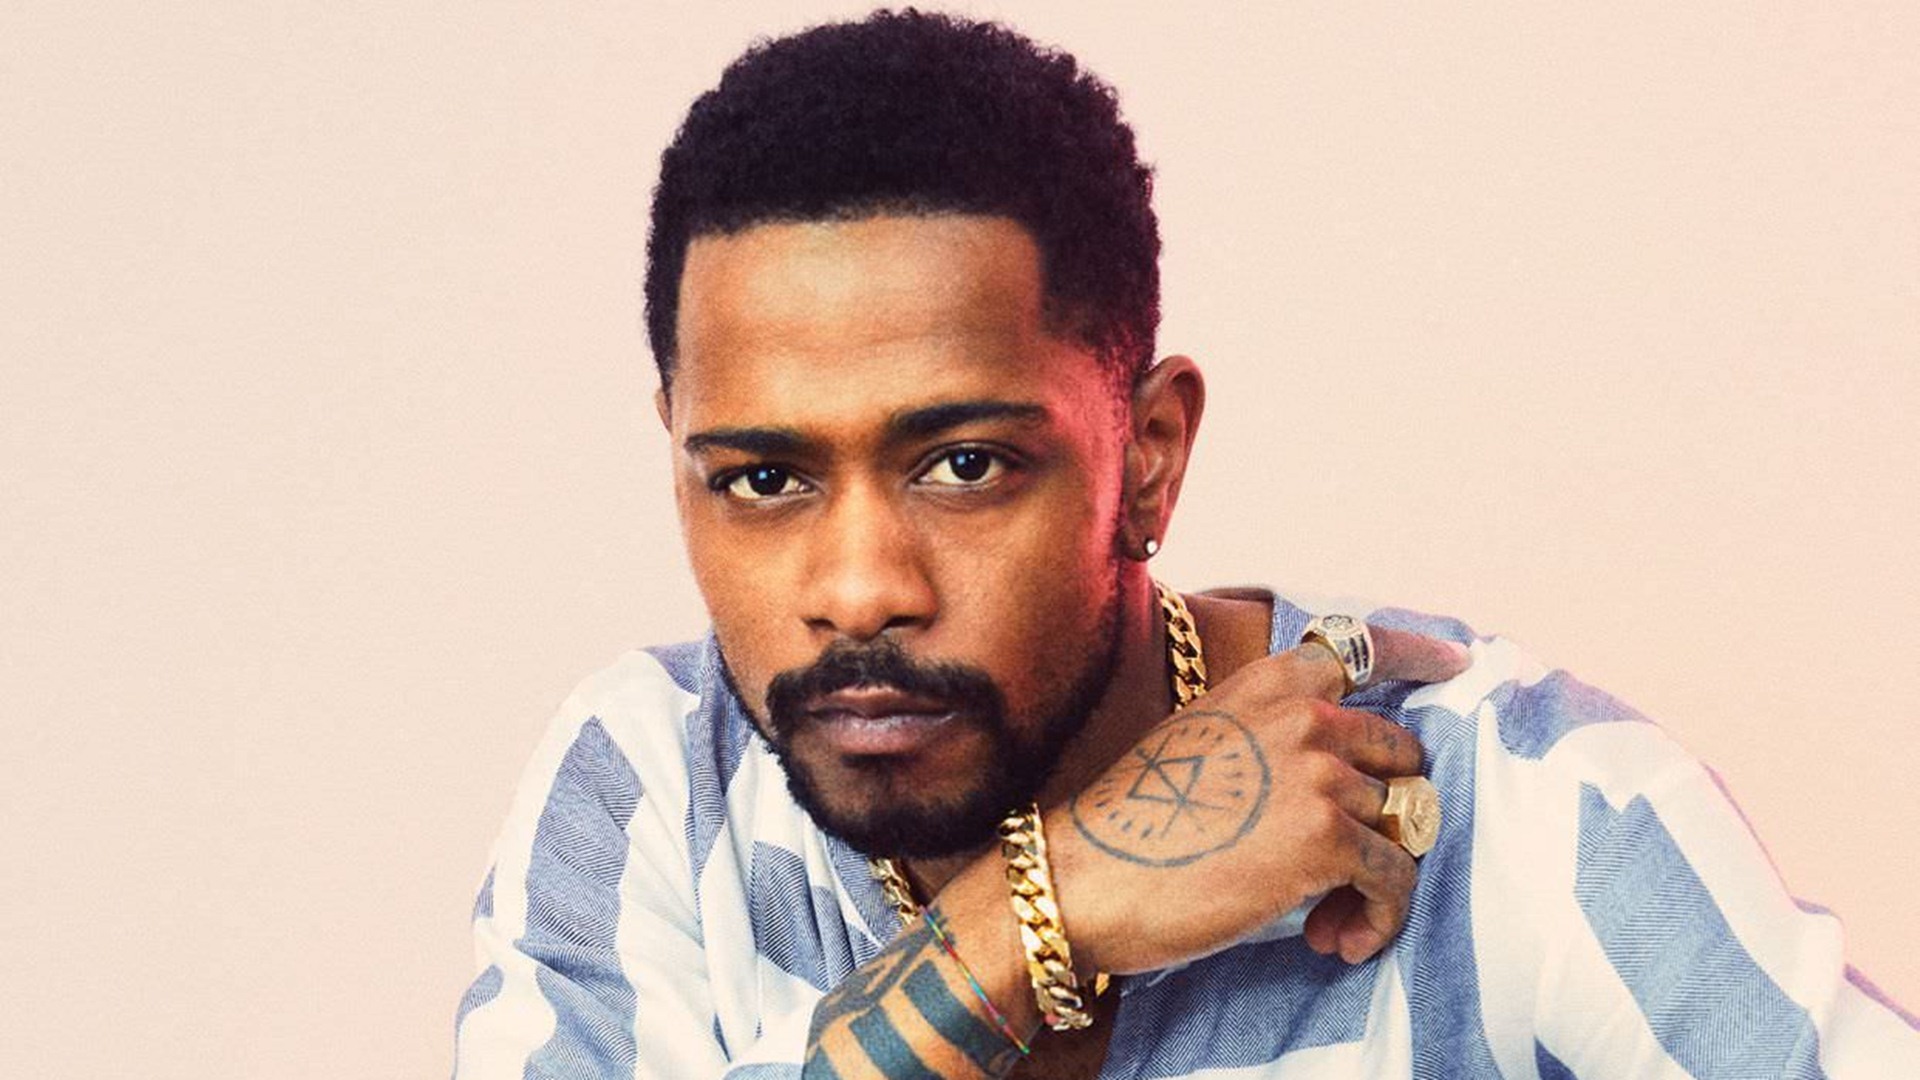 Lakeith Stanfield Background Wallpaper.